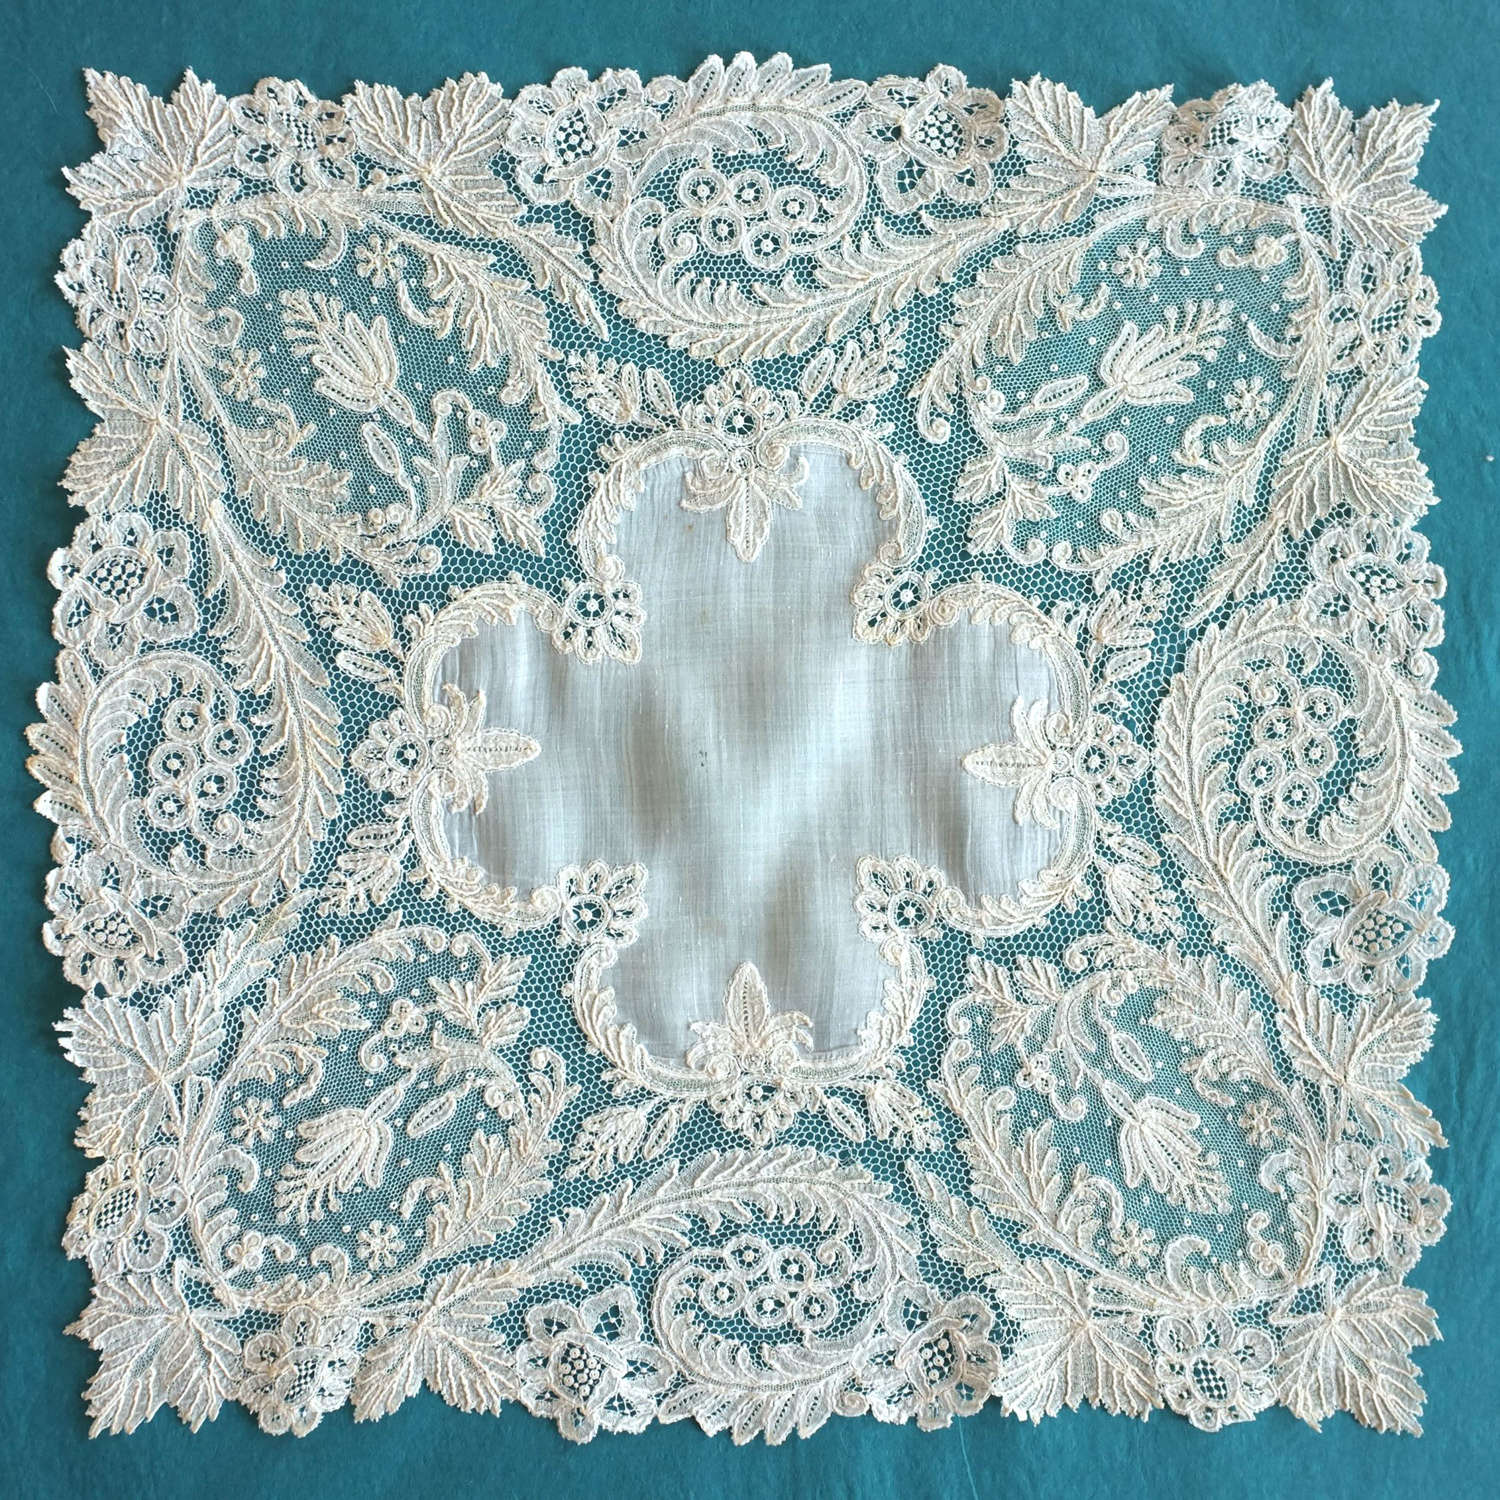 Antique Brussels Bobbin and Needle Lace Handkerchief